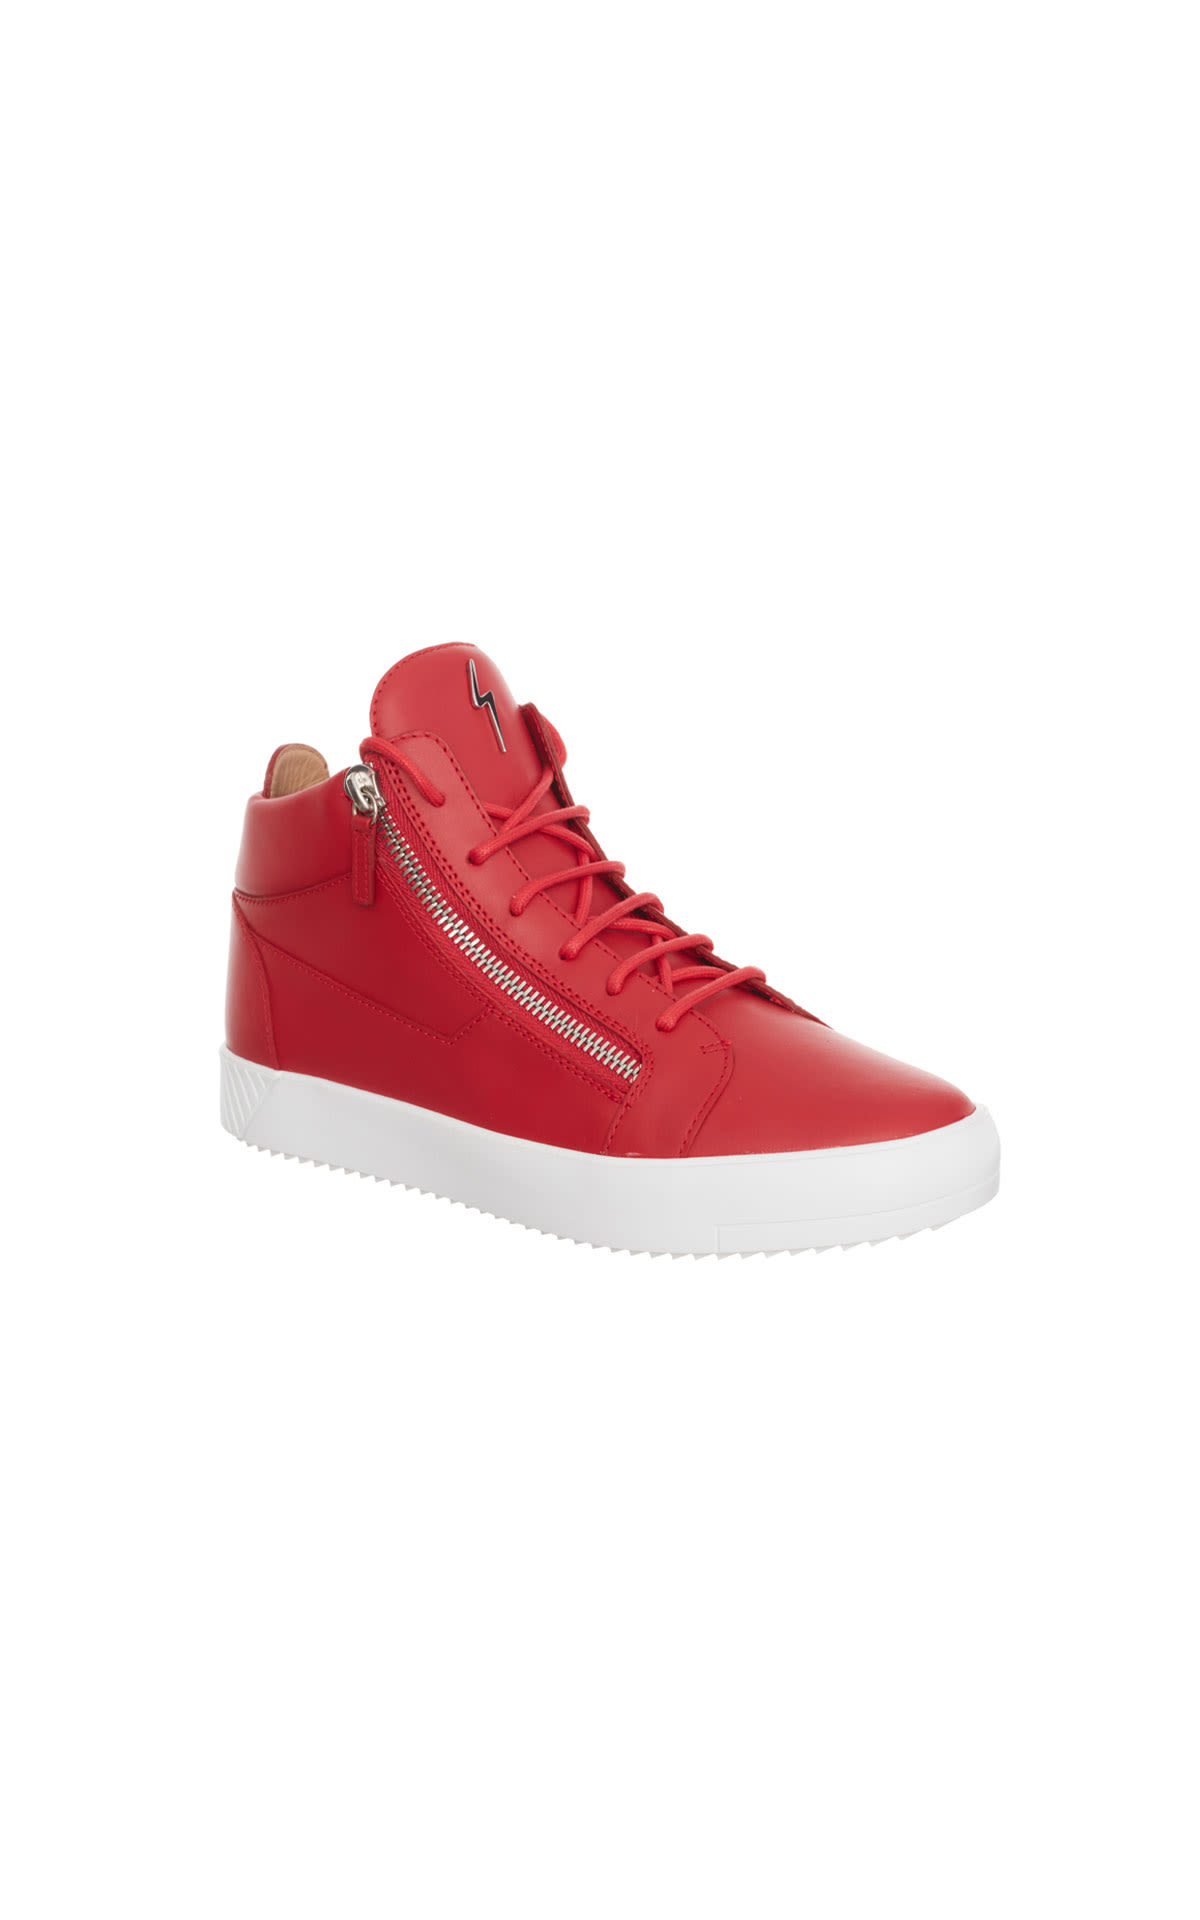 Giuseppe Zanotti High top sneaker red from Bicester Village